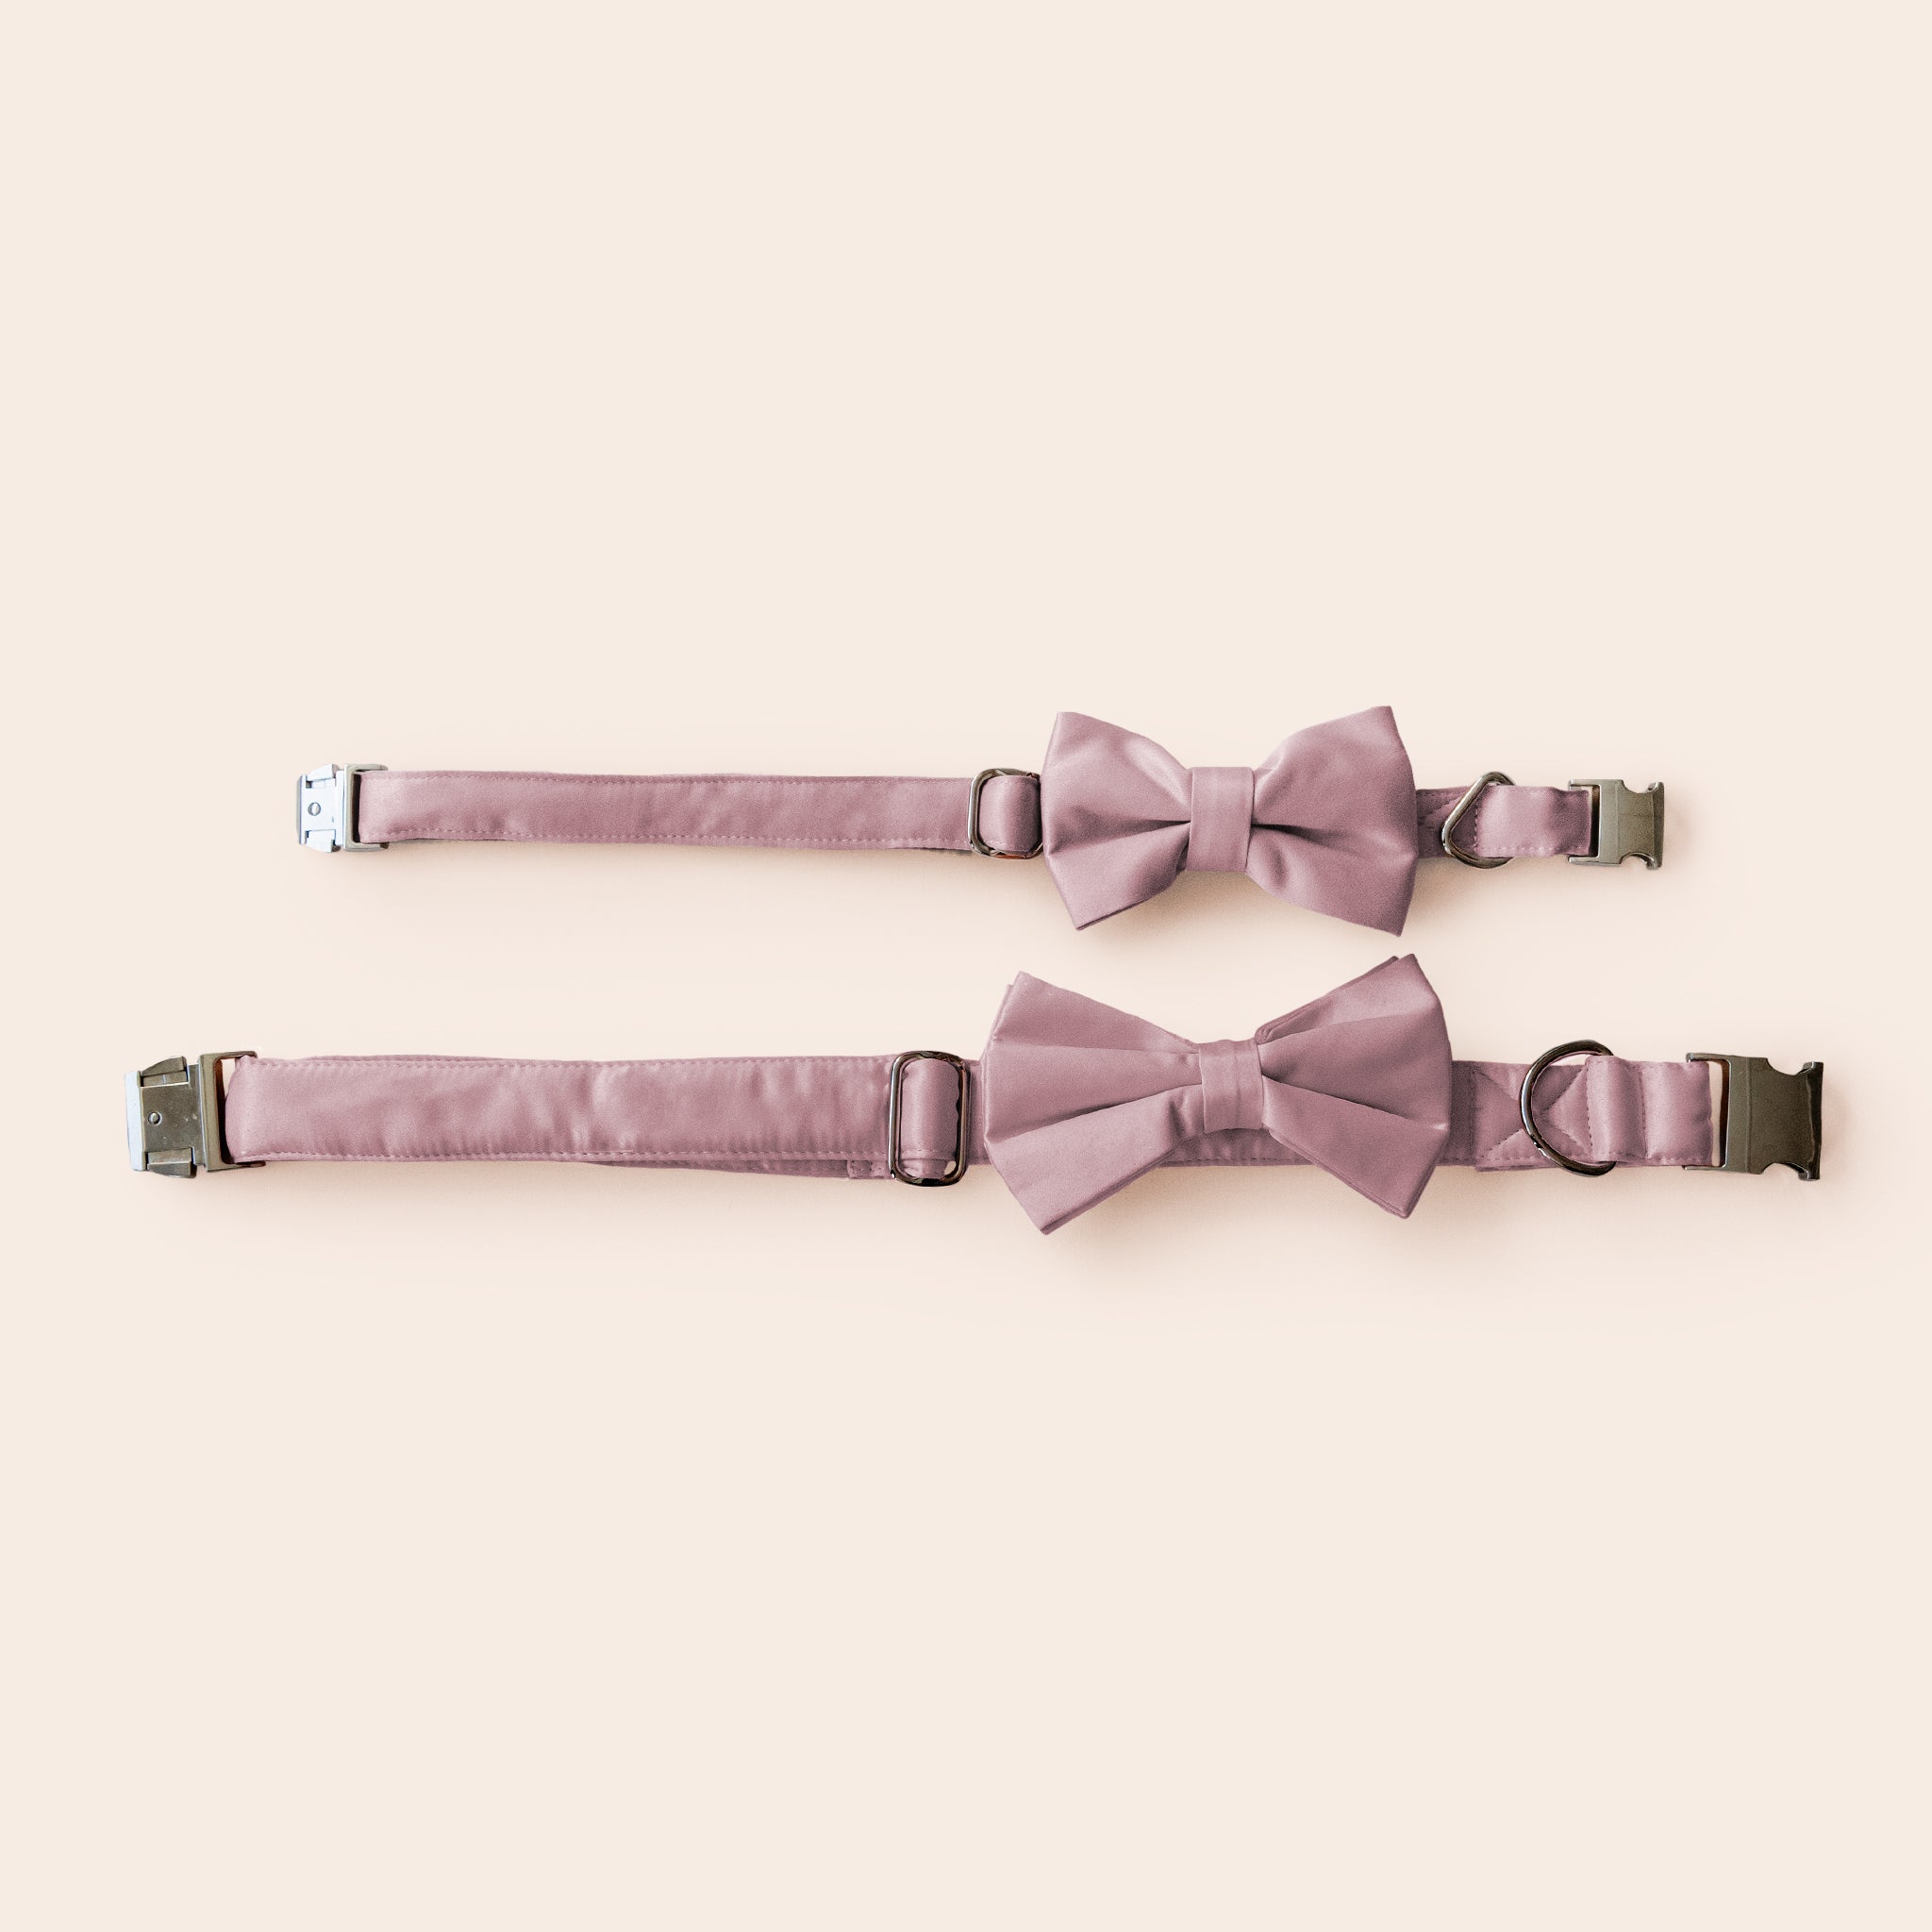 Muggsy Dog Bow Tie Collar in Dark Mauve by Birdy Grey, front view